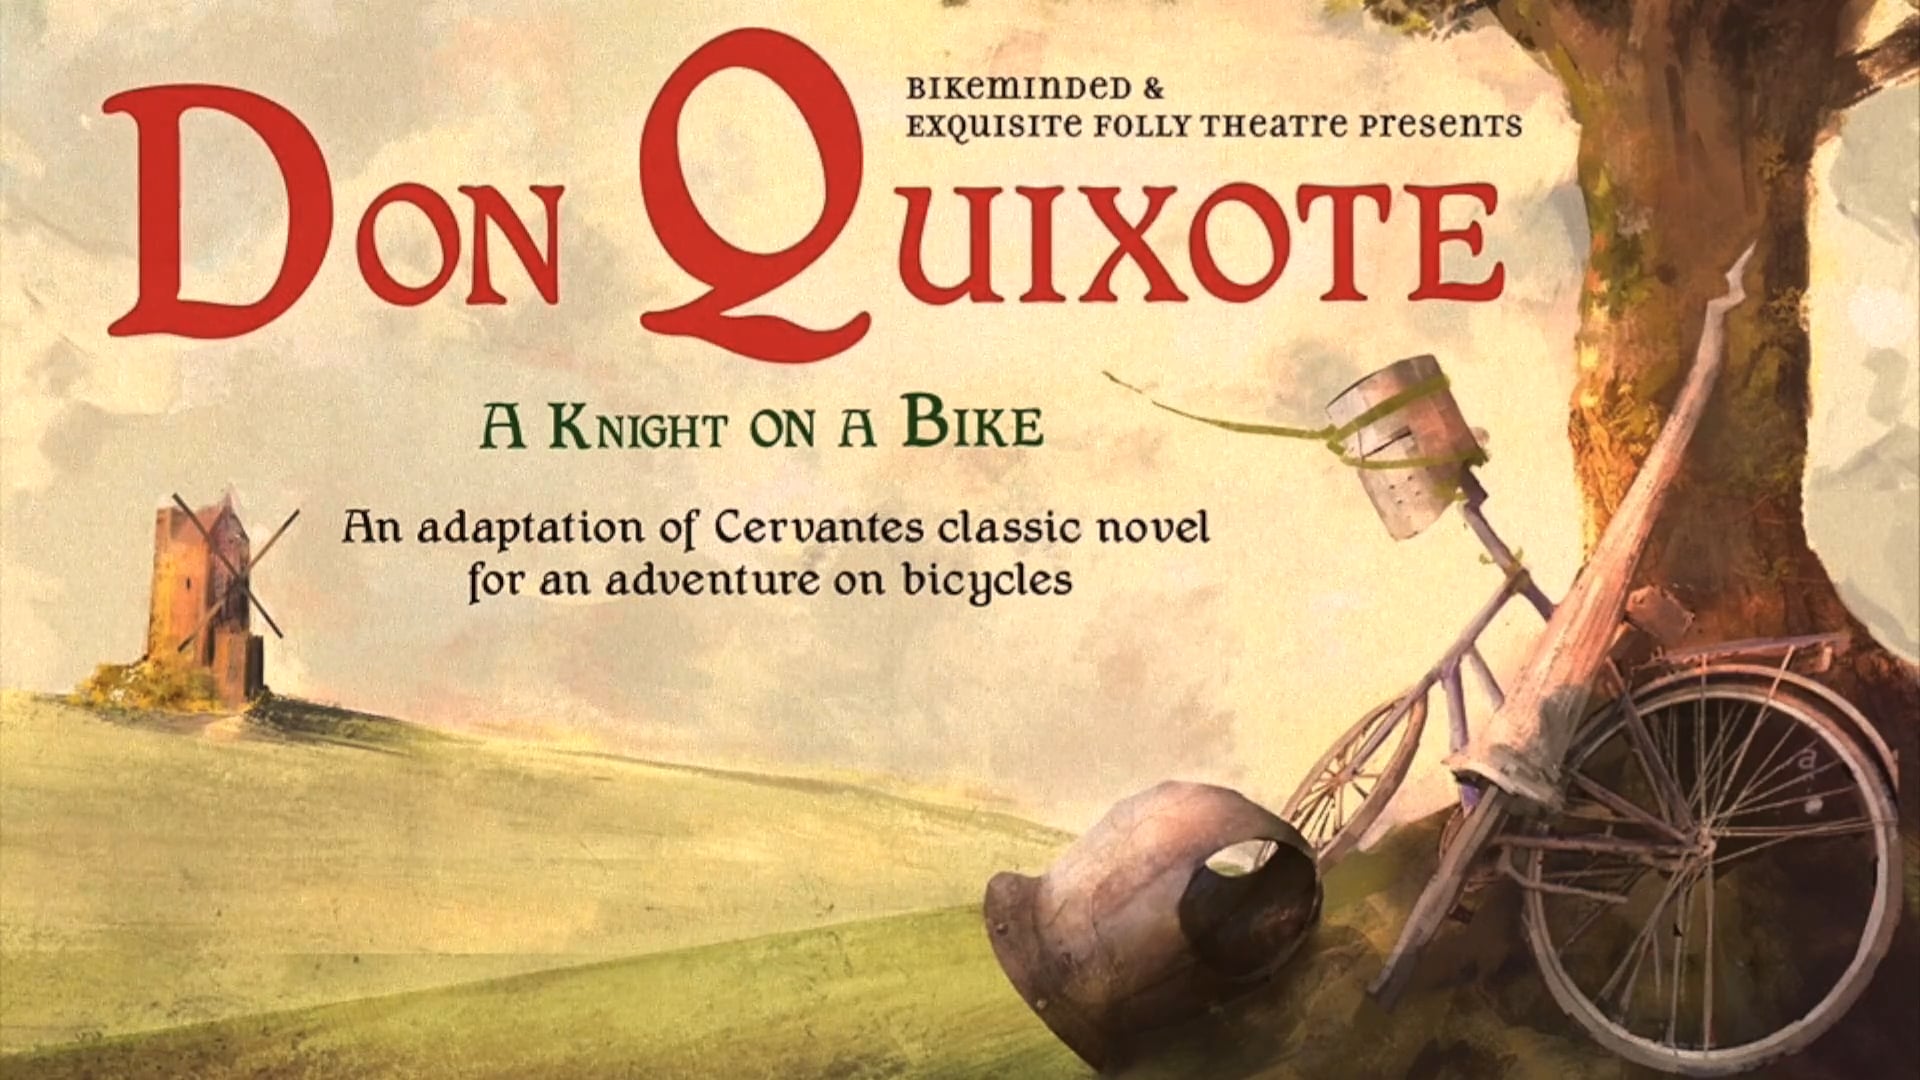 Don Quixote  - A Knight on a Bike, Bikeminded and Exquisite Folly Trailer